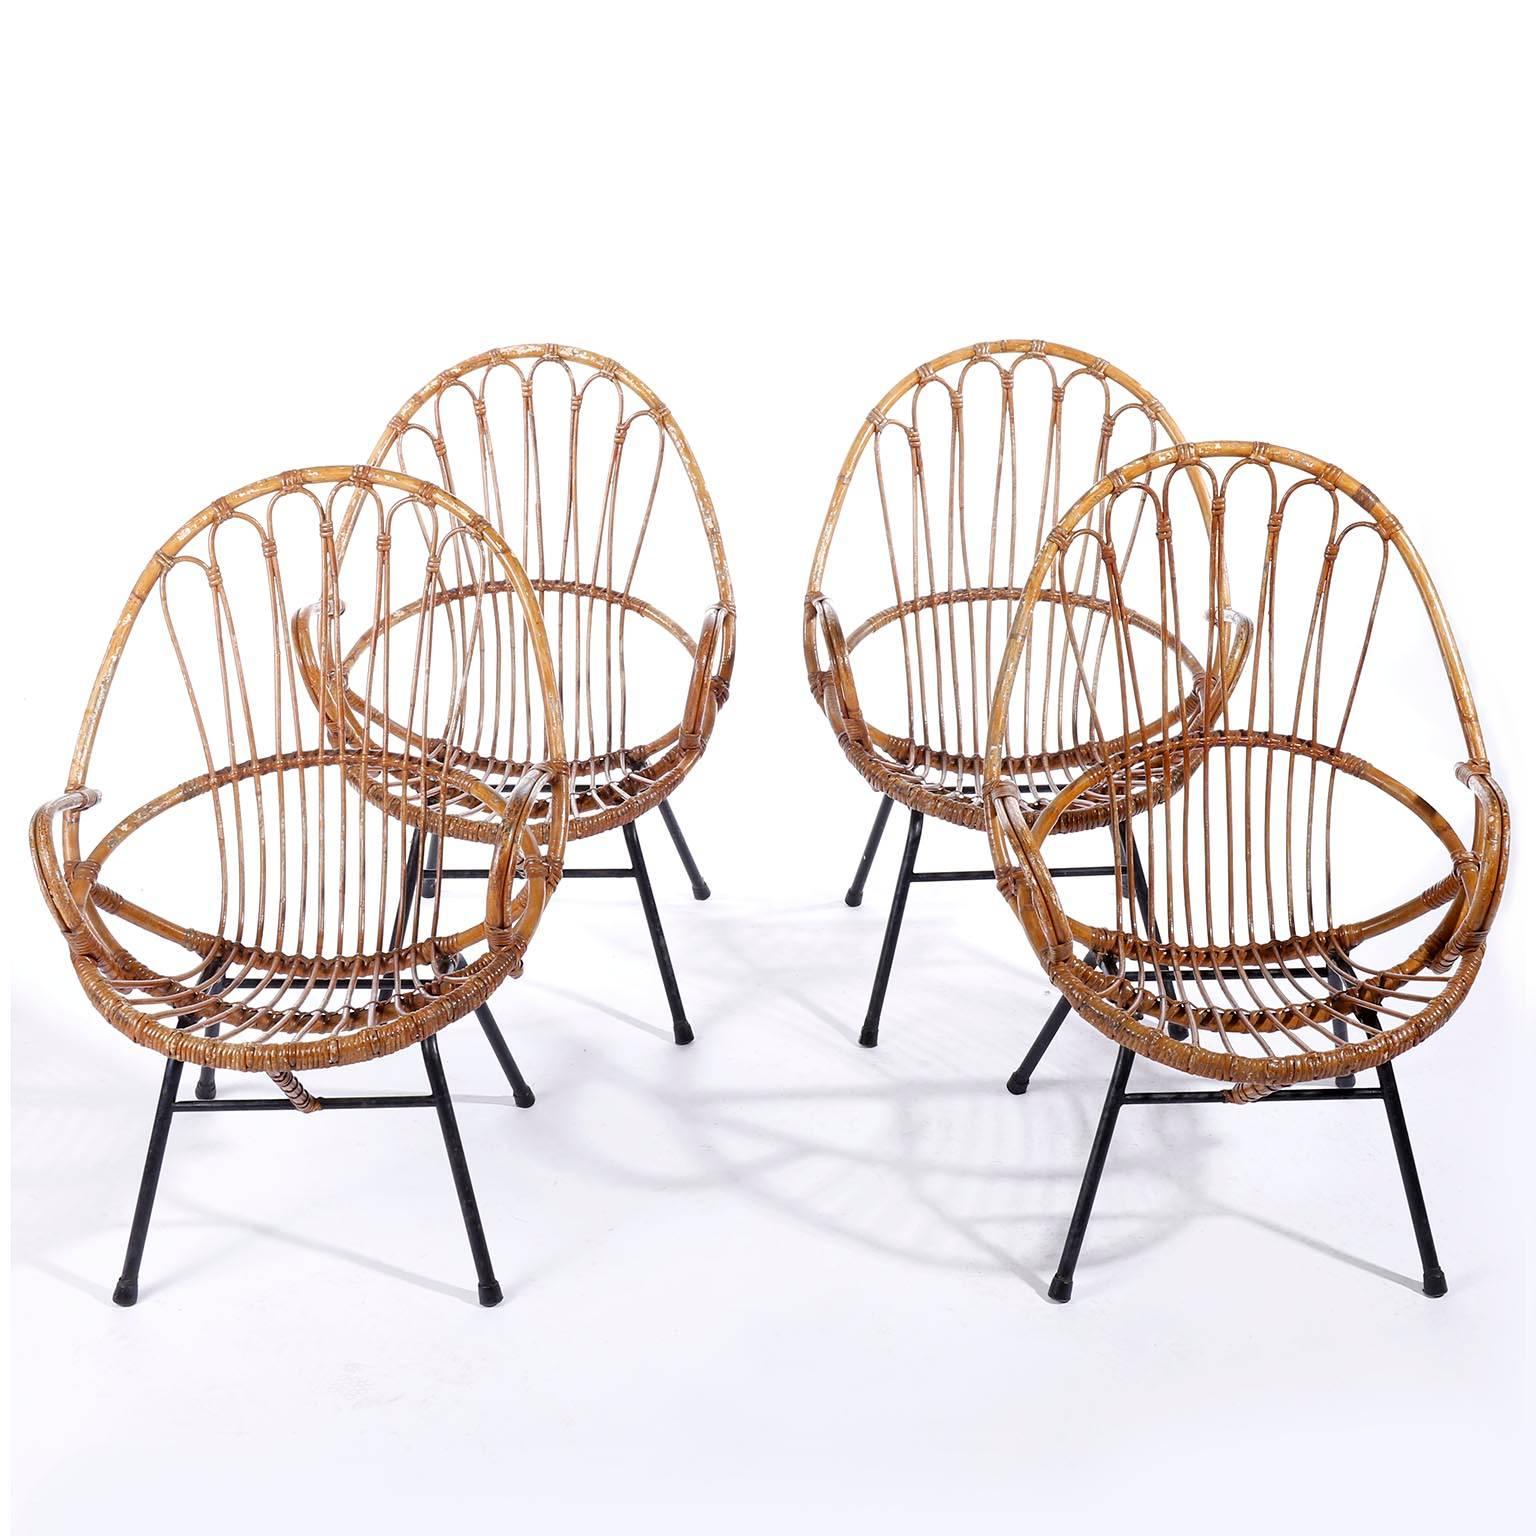 Mid-20th Century Four Rattan Wicker Bamboo Chairs Armchairs, Rohe Noordwolde, Netherlands, 1960s